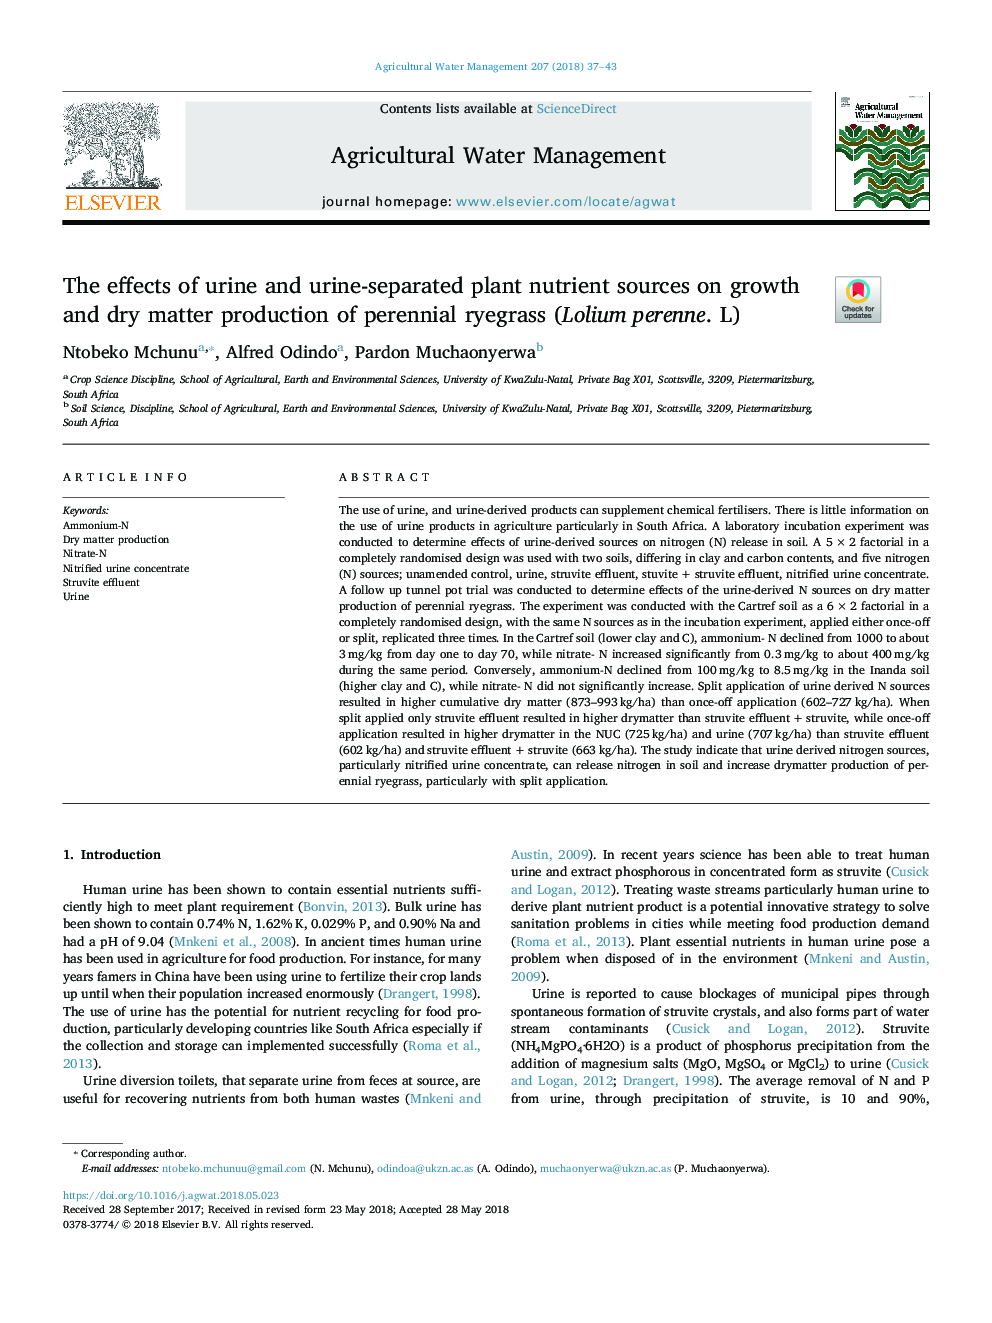 The effects of urine and urine-separated plant nutrient sources on growth and dry matter production of perennial ryegrass (Lolium perenne. L)